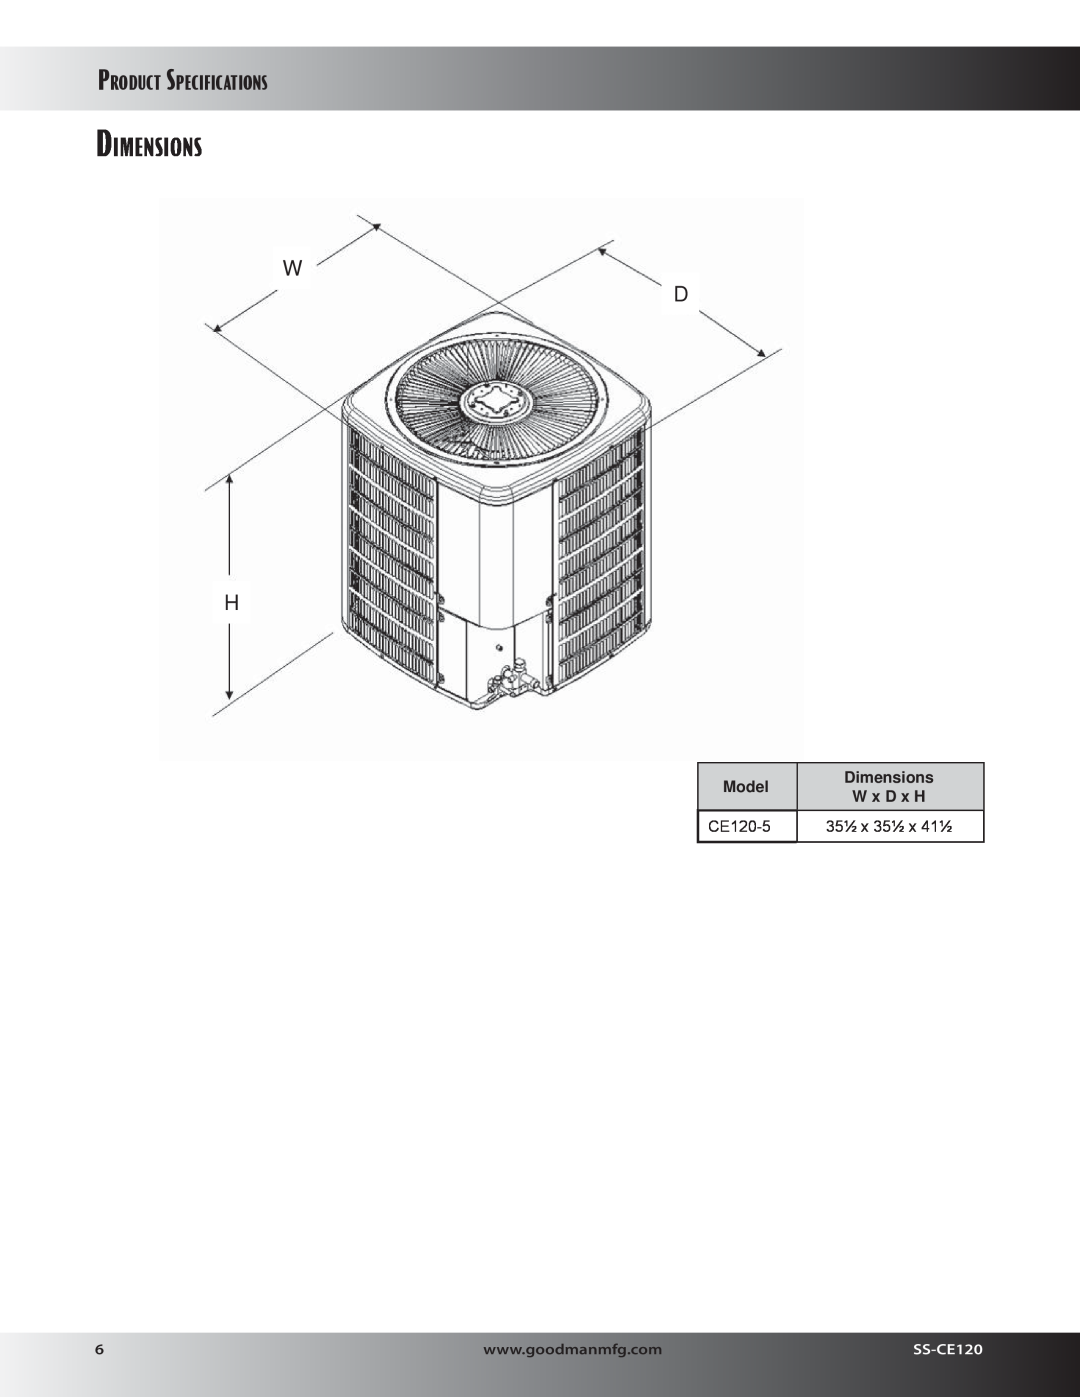 Goodman Mfg SS-CE120, CE COMMERCIAL SPLIT SYSTEM AIR CONDITIONER specifications Dimensions, Product Specifications, W D H 